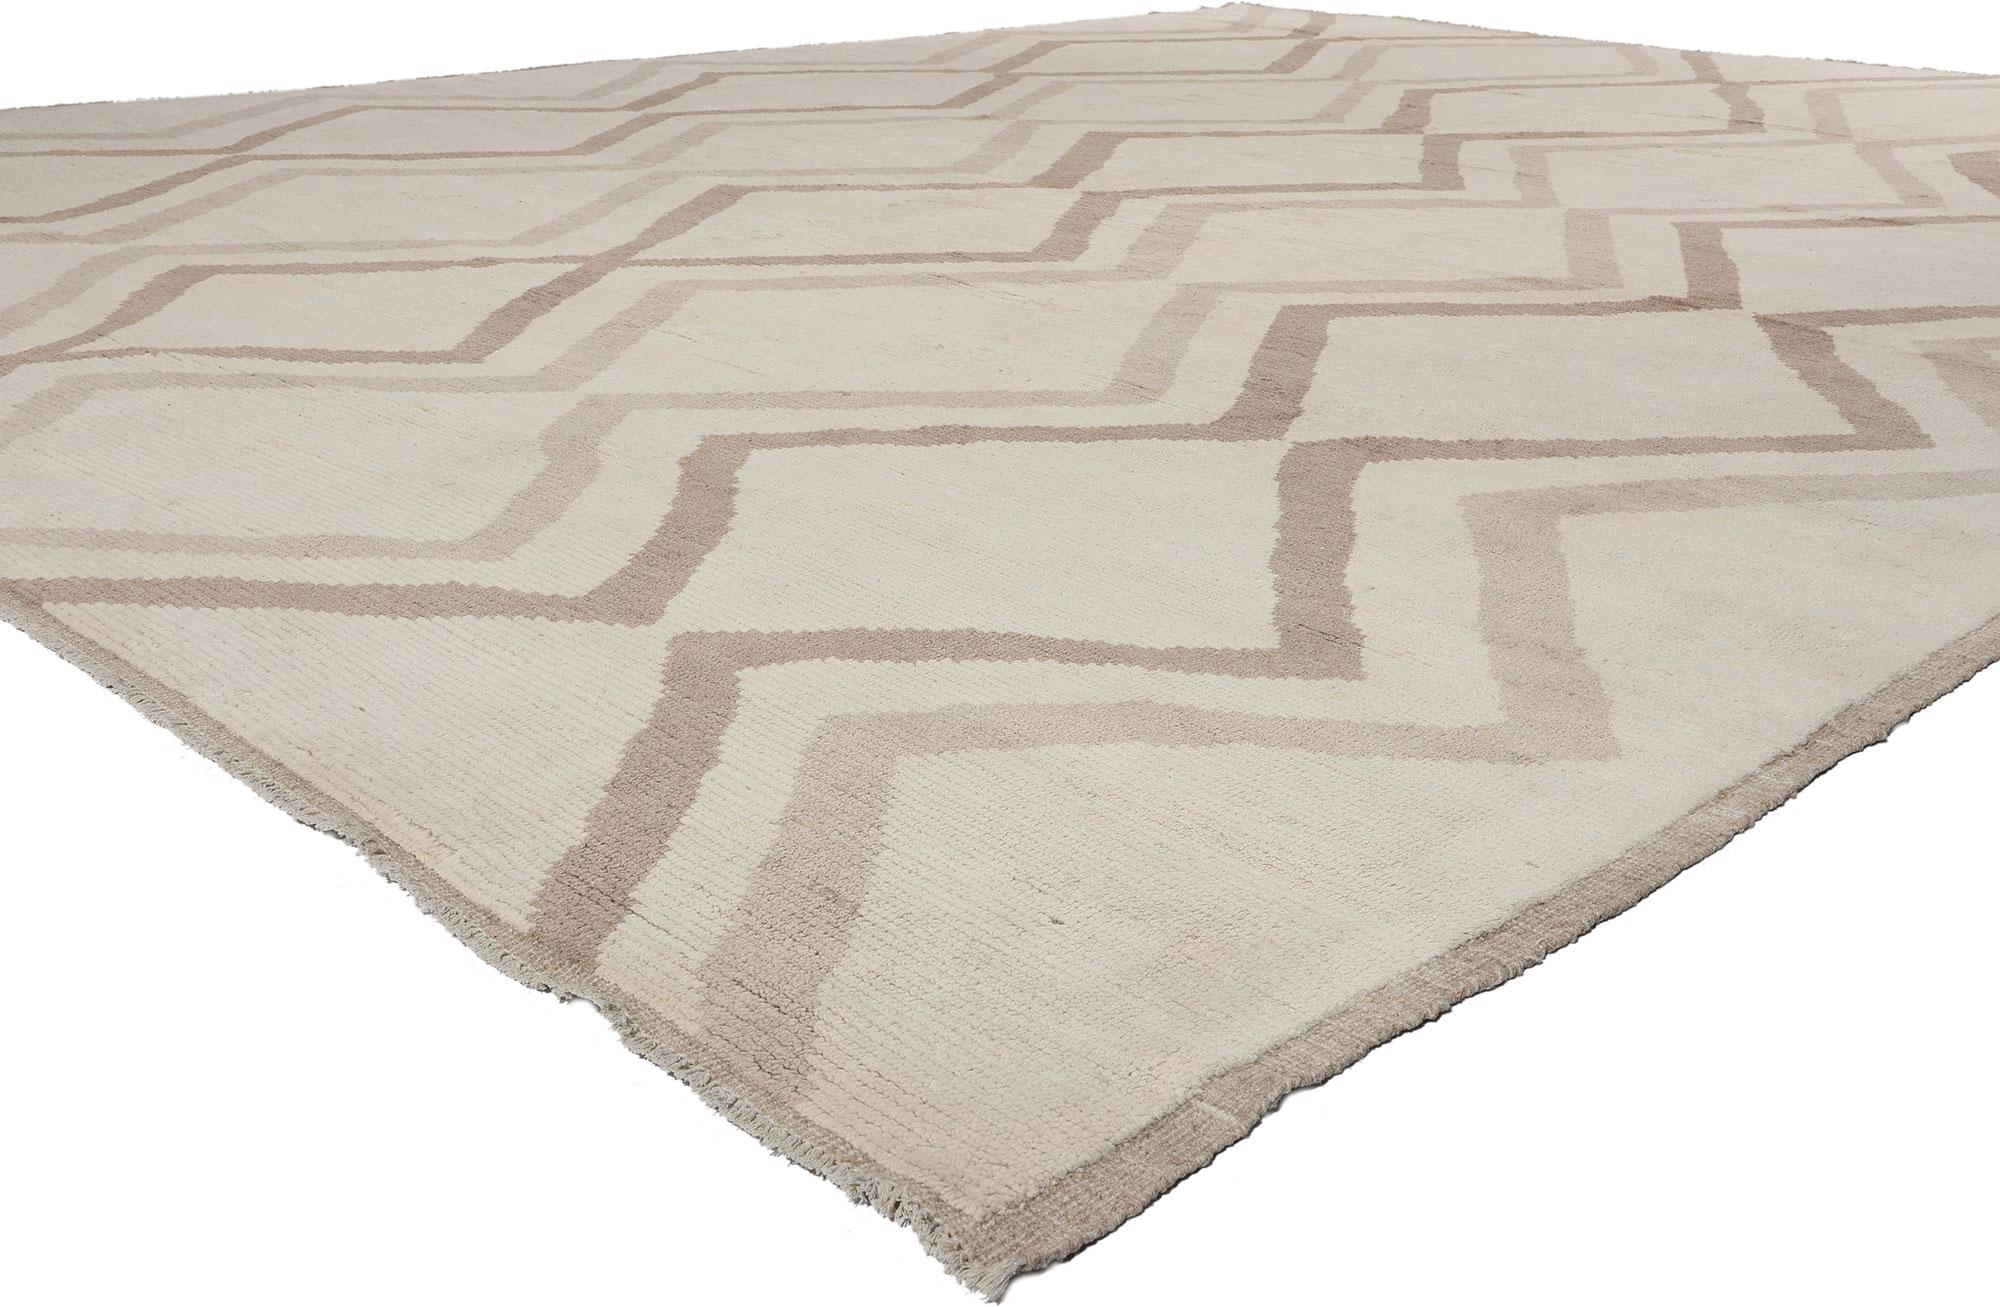 81082 Organic Modern Zigzag Moroccan Rug, 12'02 x 15'05. Step into a realm where simplicity meets serenity with our hand-knotted wool Moroccan area rug, a masterpiece destined to grace floors with elegance. Picture a backdrop of soothing beige, akin